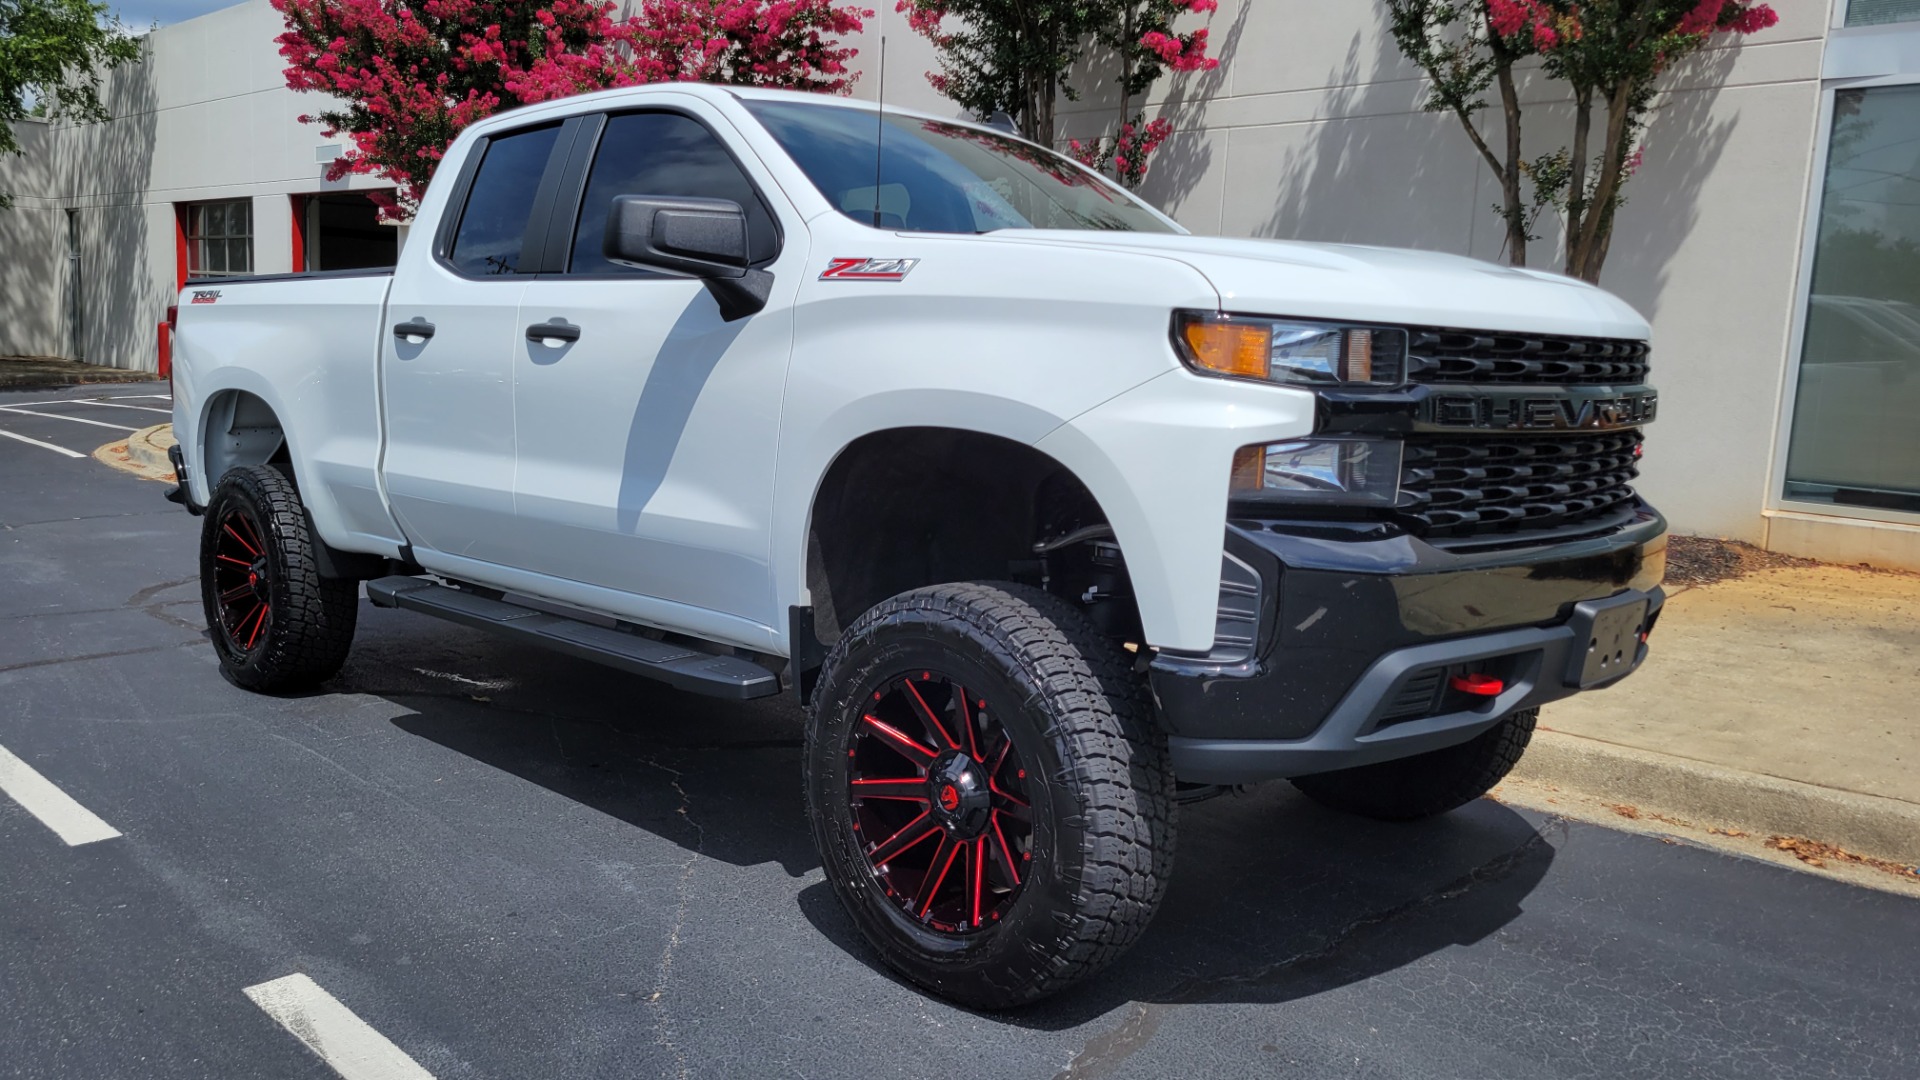 Used 2020 Chevrolet SILVERADO 1500 CUSTOM TRAIL BOSS 4X4 5.3L / REMOTE START / WIFI / REARVIEW for sale $42,995 at Formula Imports in Charlotte NC 28227 5